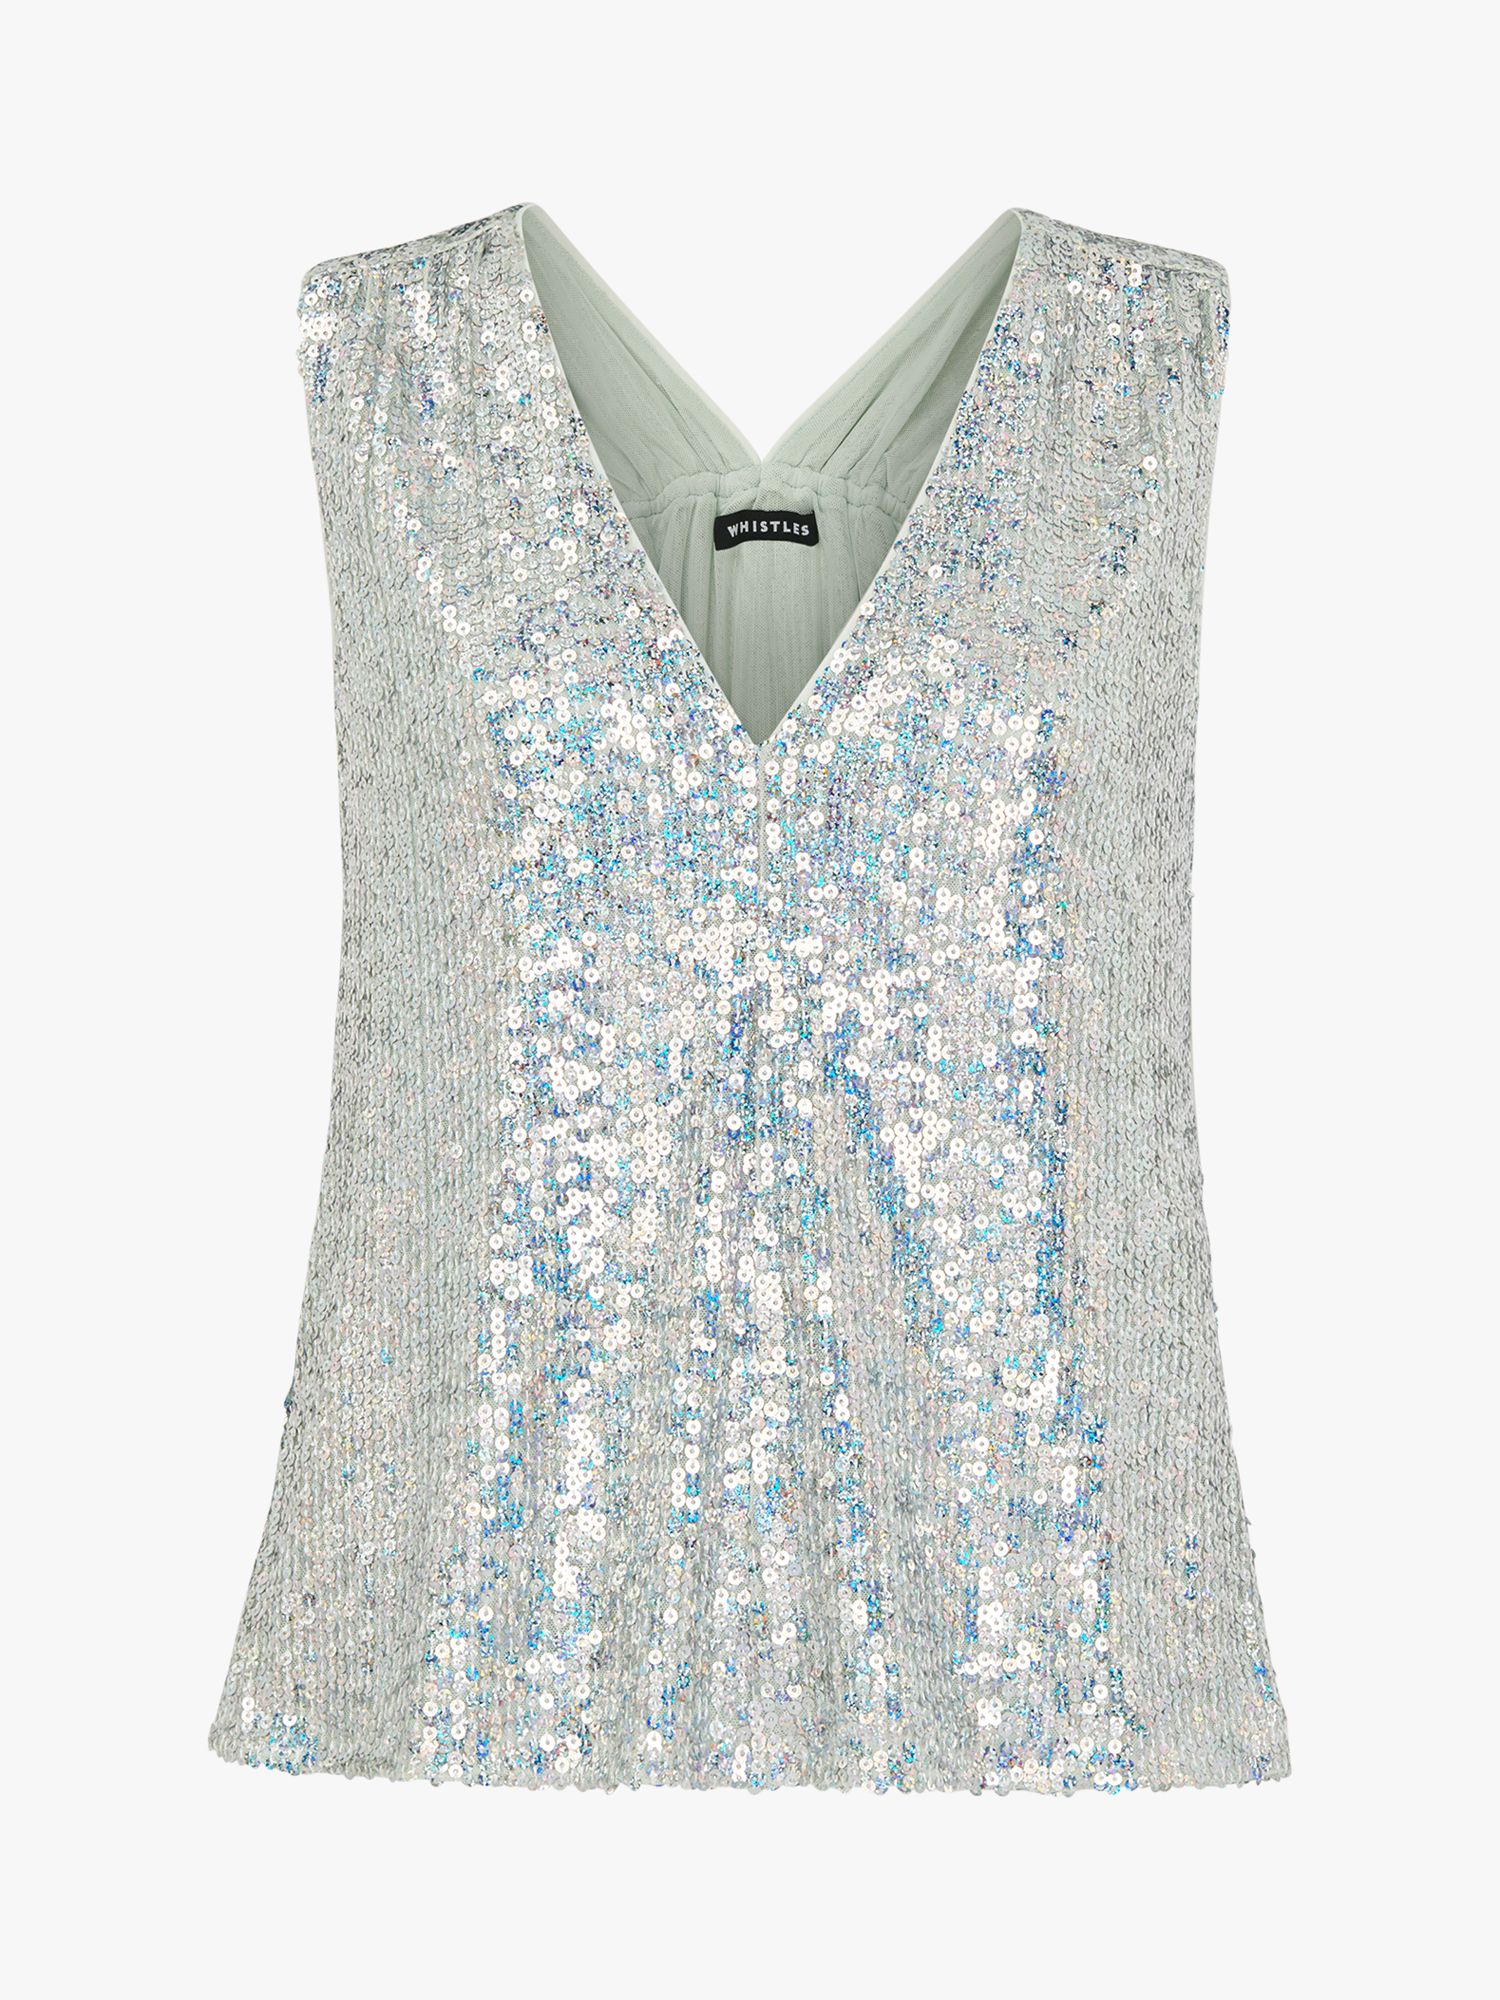 Whistles Claudia Sequin Vest Top, Silver, 6